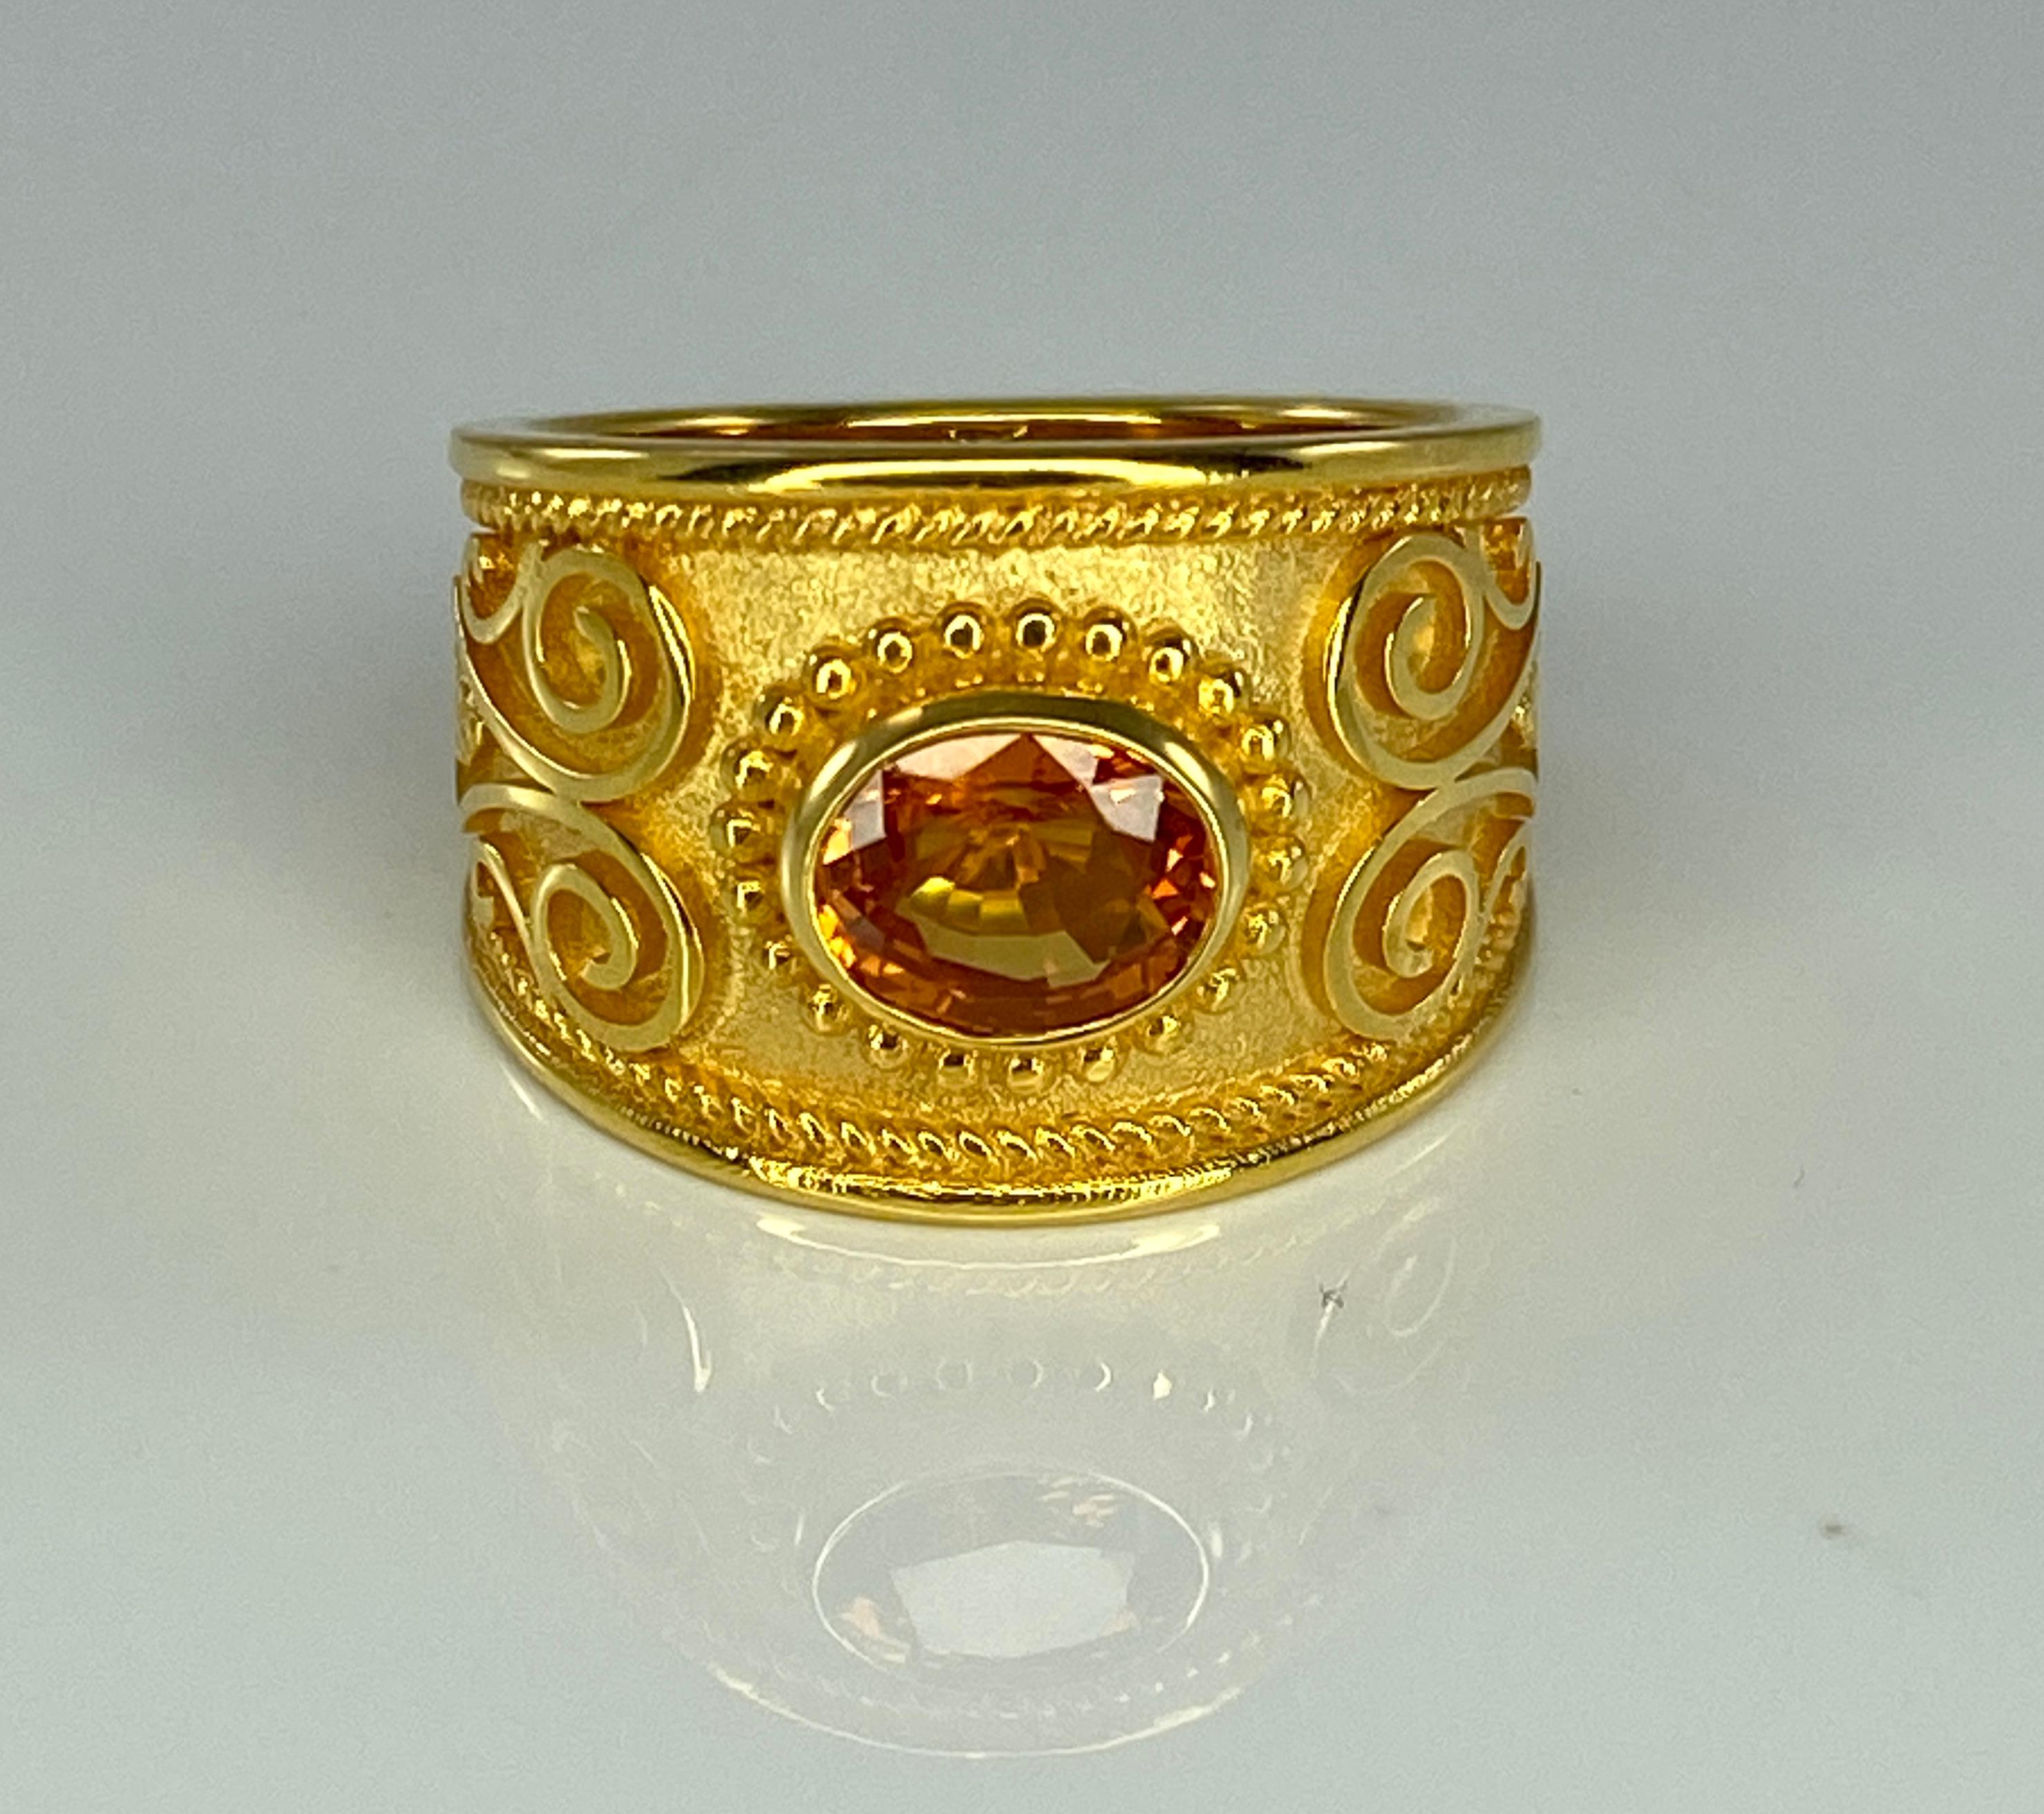 Presenting S.Georgios designer 18 Karat Solid Yellow Gold Ring all handmade with the Byzantine Style workmanship and a unique velvet background decorated with natural oval cut 1.52 Carat Orange Sapphire. All the granulated decorations of this ring